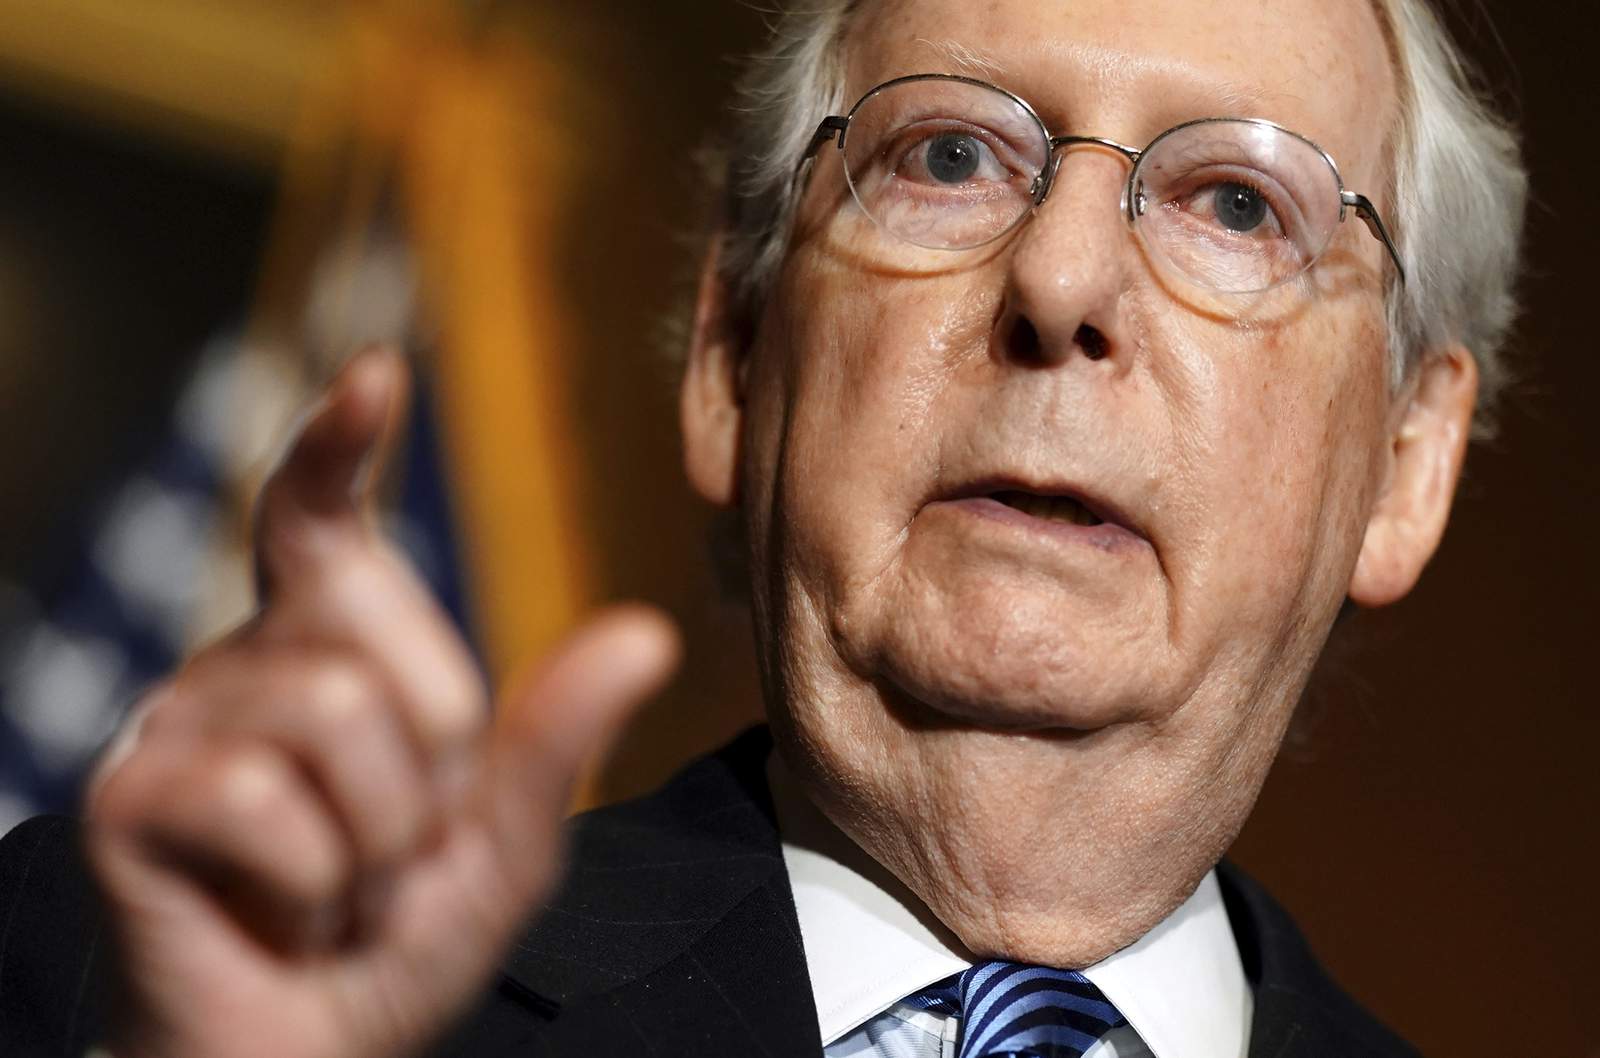 McConnell blocks vote on $2,000 checks, says Senate will ‘begin a process’ to address issue